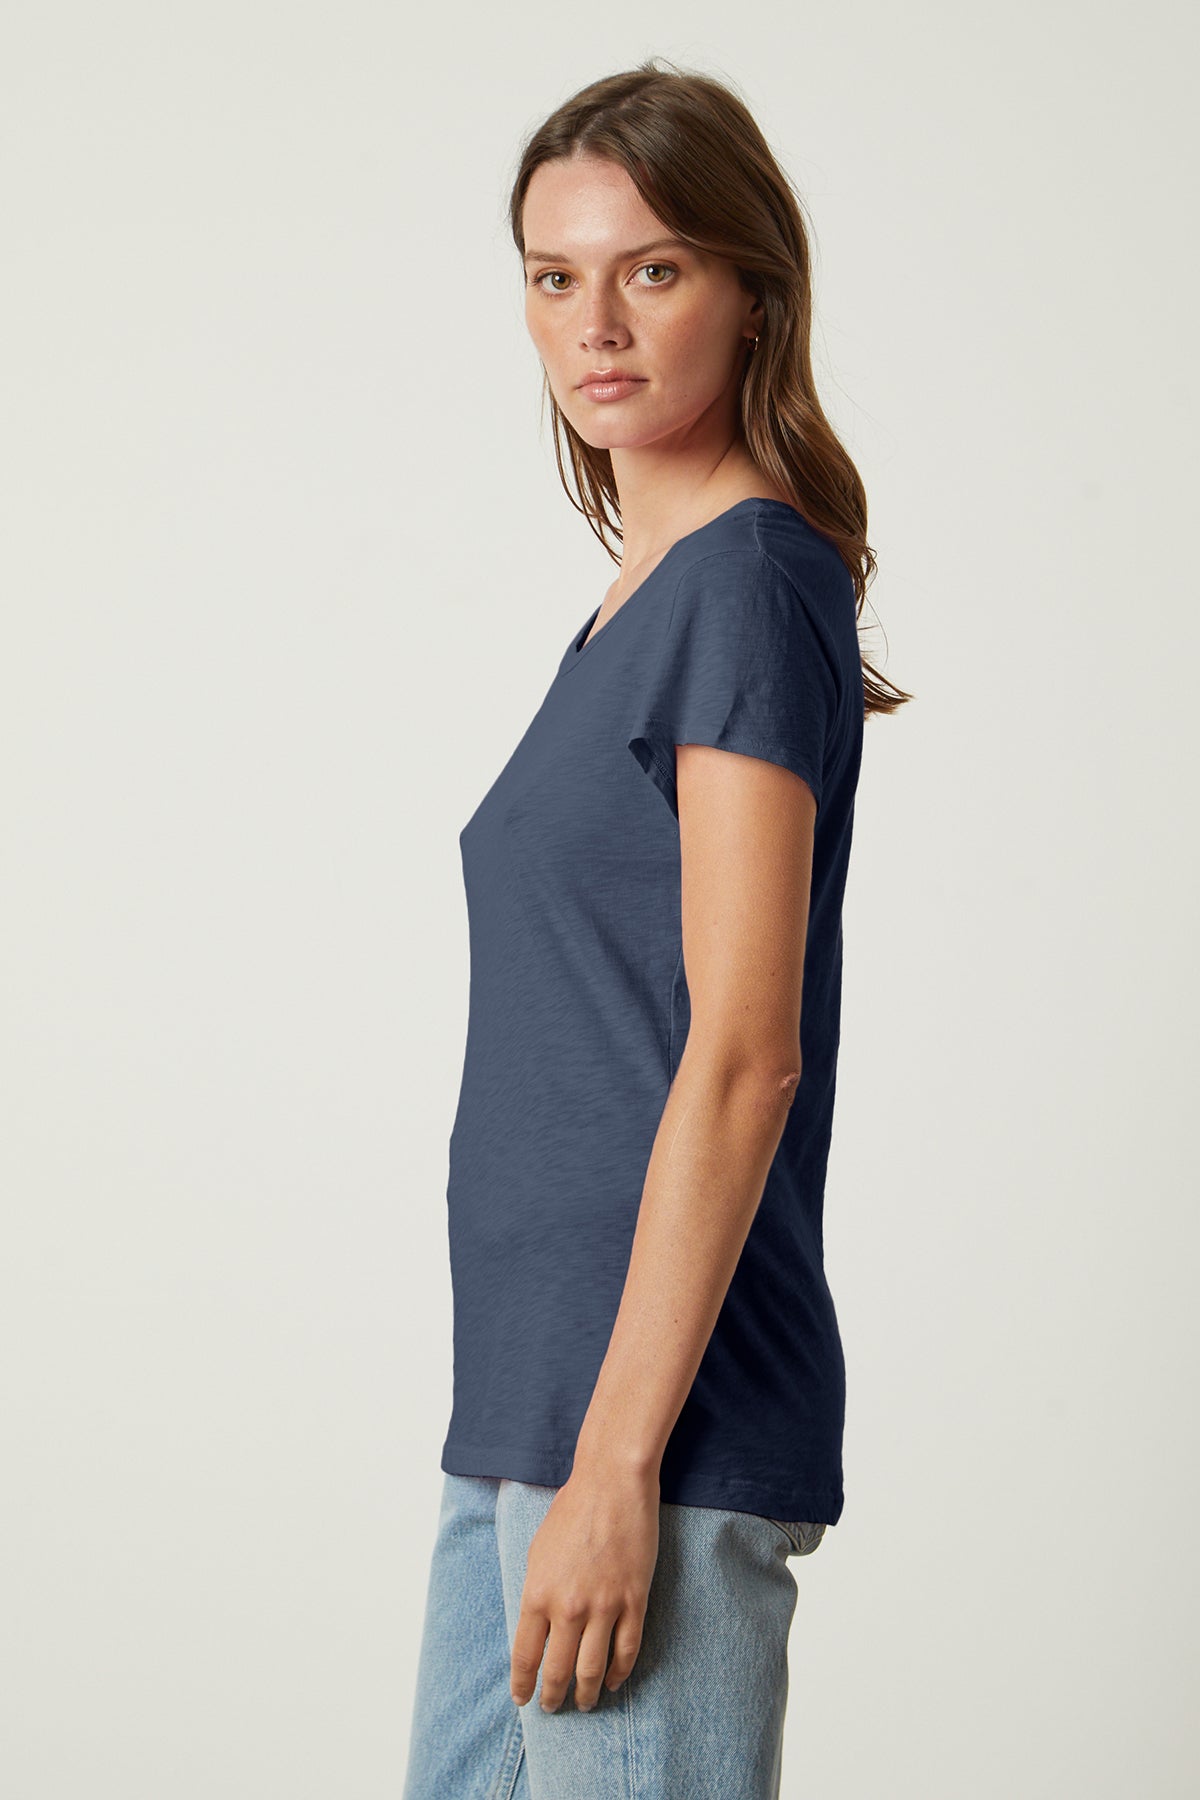 A woman with long brown hair is wearing a navy blue ODELIA TEE by Velvet by Graham & Spencer and light blue jeans, standing sideways and looking at the camera.-37250155446465